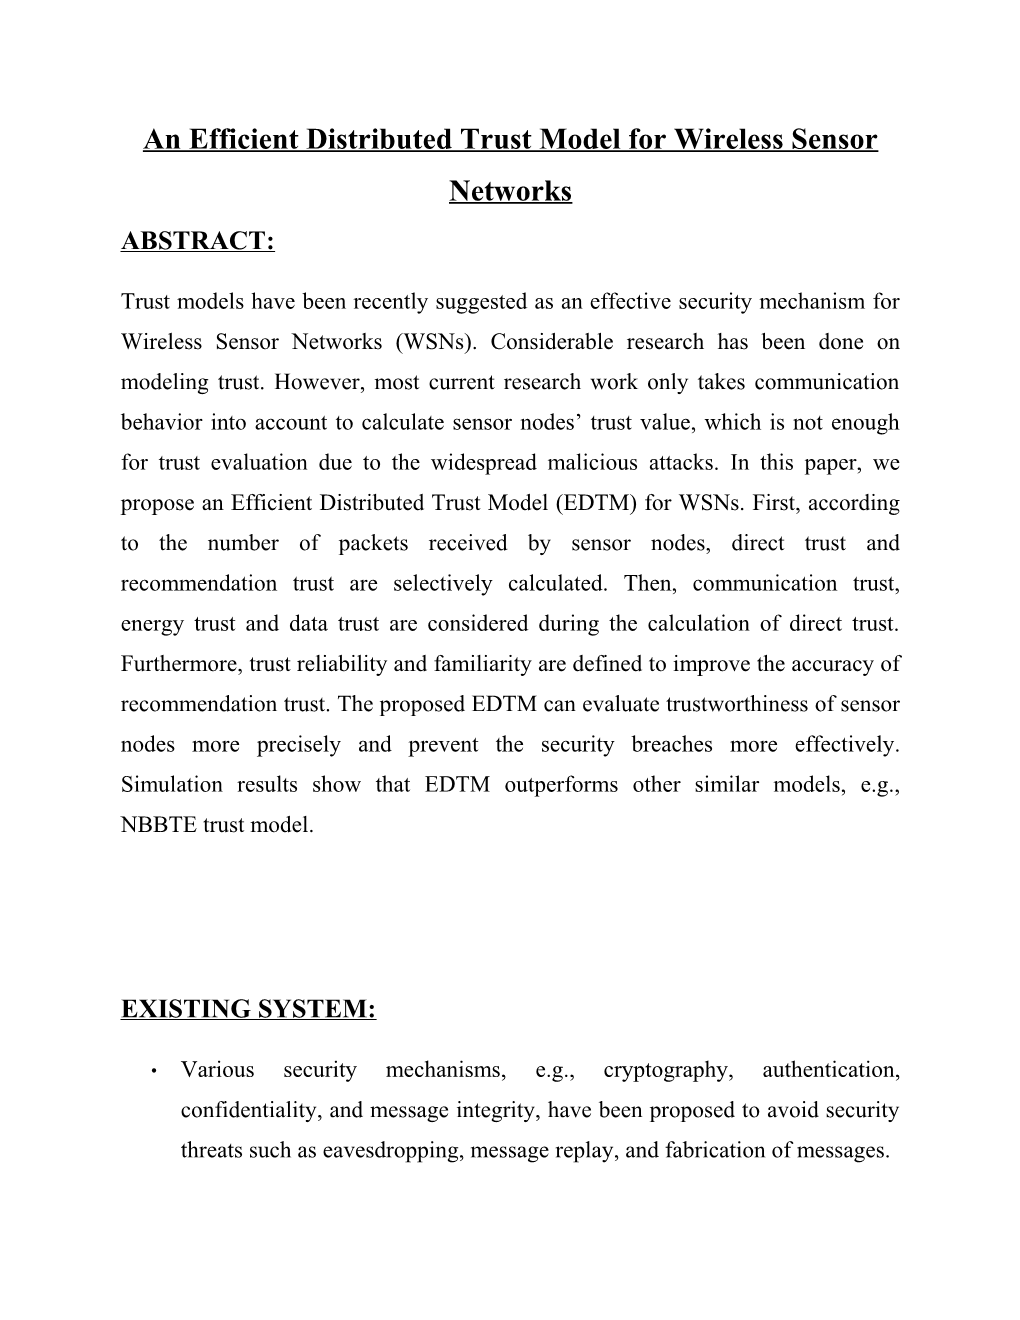 An Efficient Distributed Trust Model for Wireless Sensor Networks